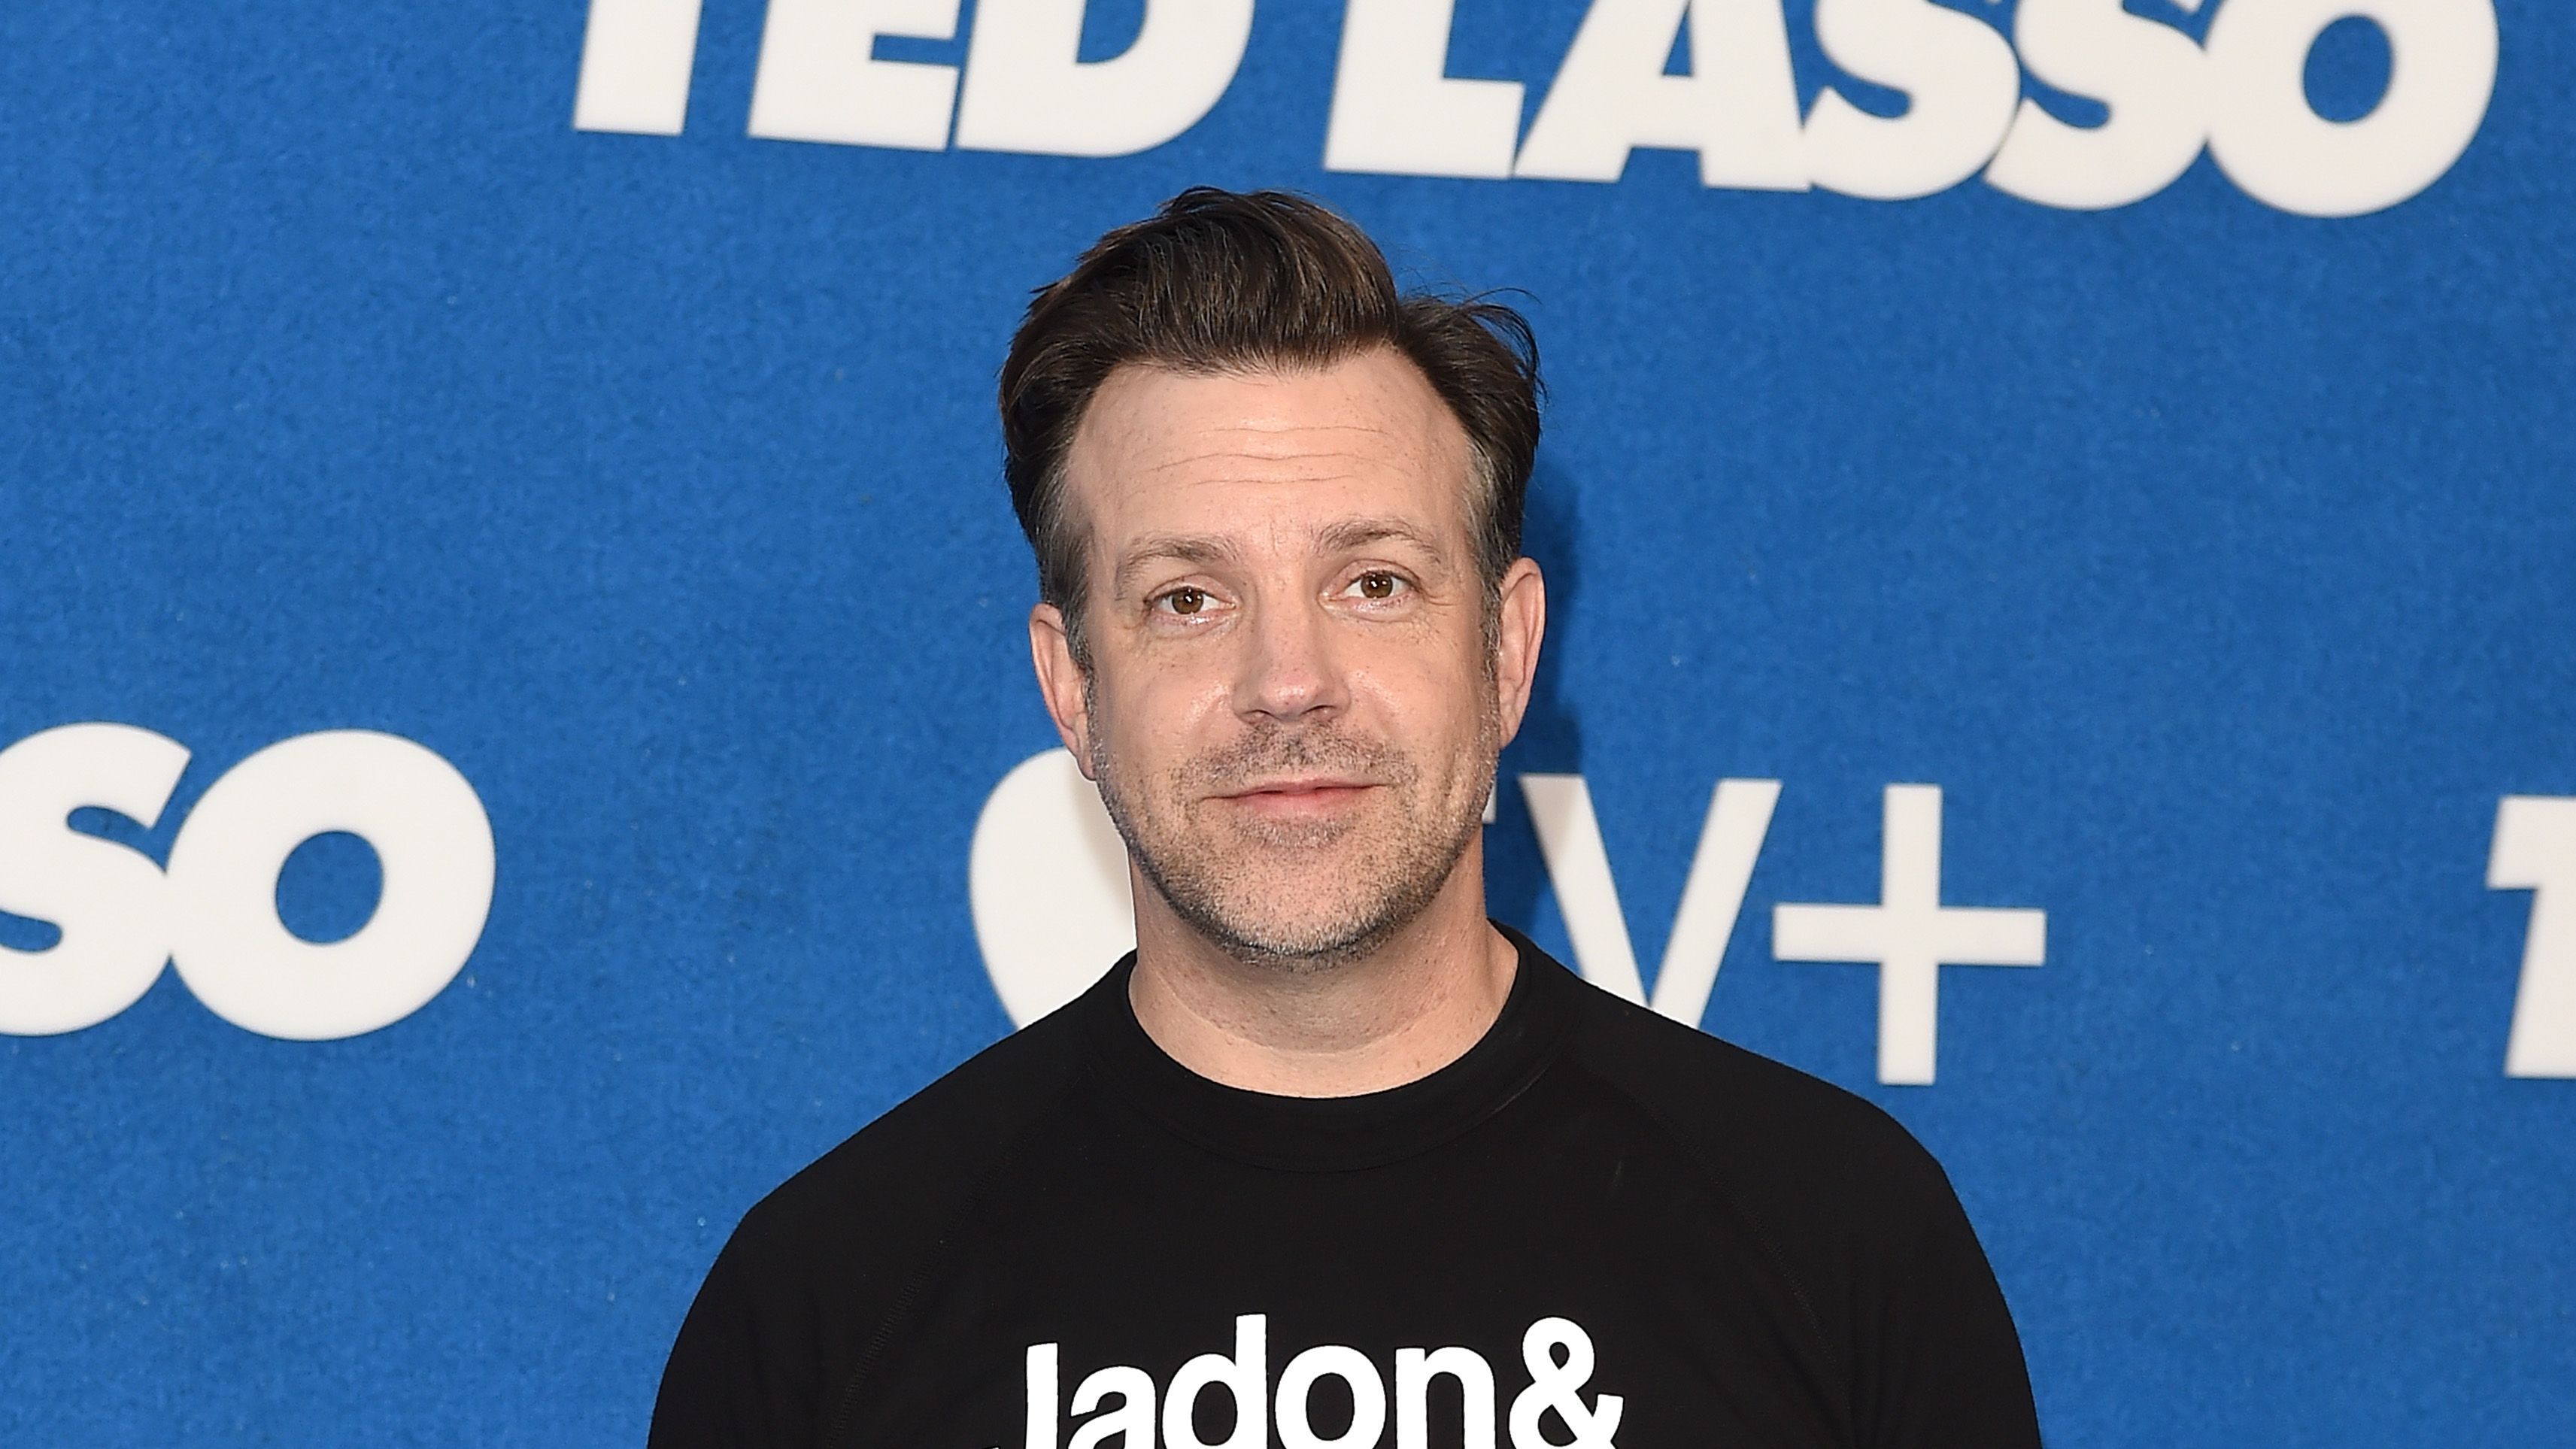 Ted Lasso's Jason Sudeikis Shows Supports for English Soccer Players